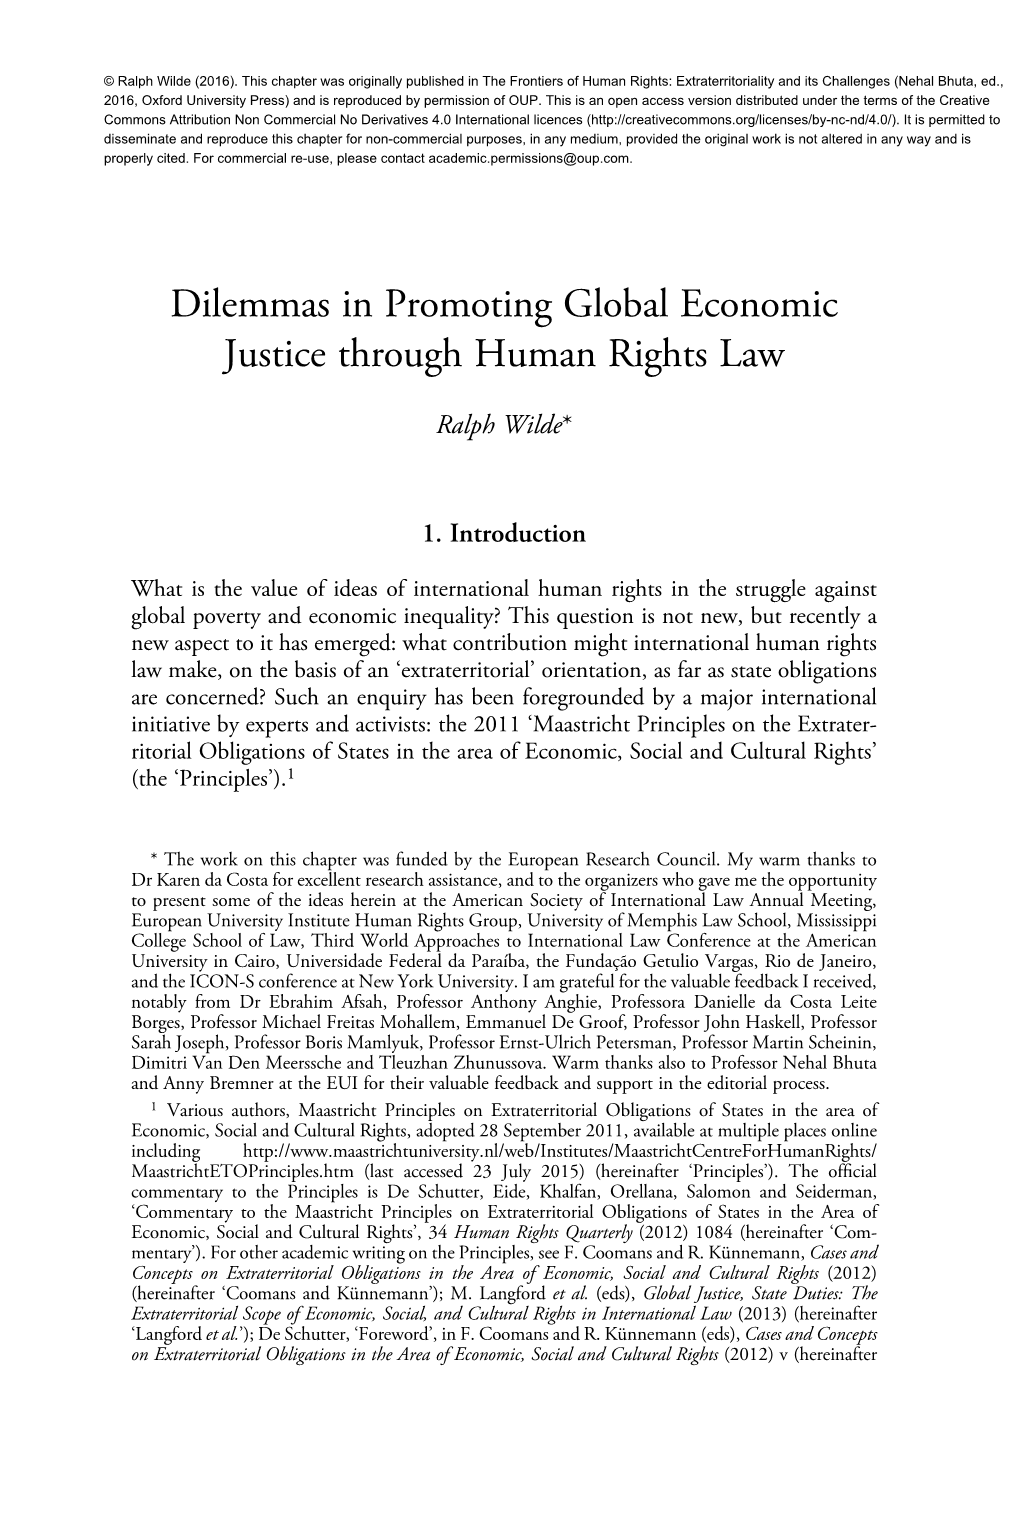 Dilemmas in Promoting Global Economic Justice Through Human Rights Law